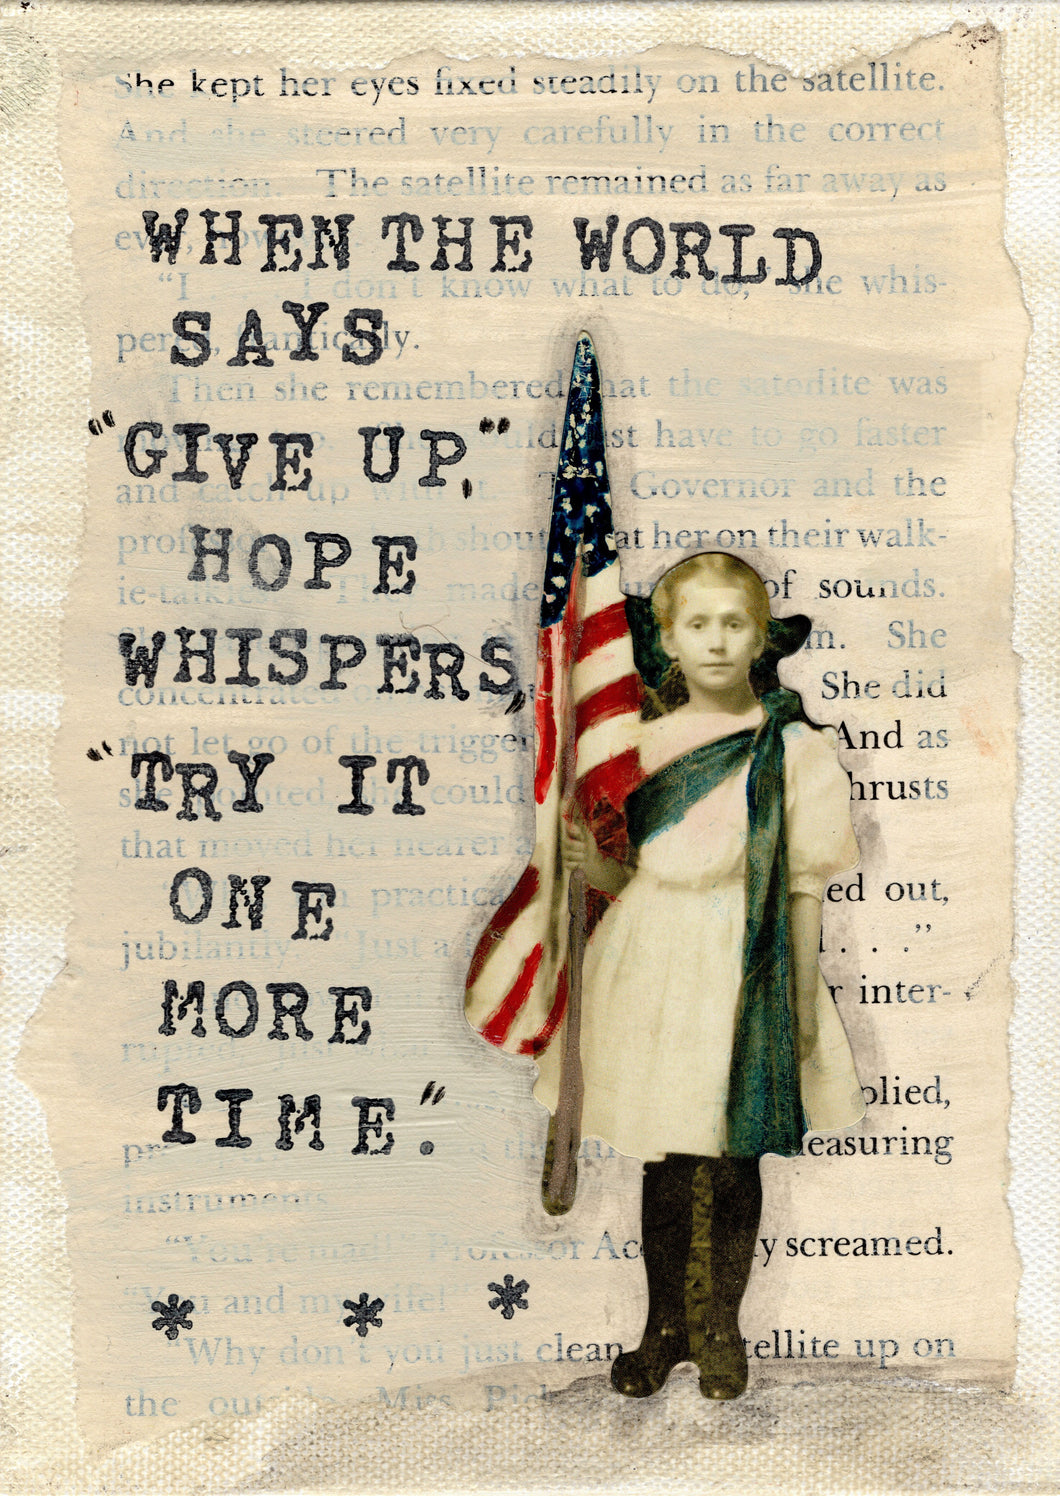 When the world says give up, hope whispers try it one more time.